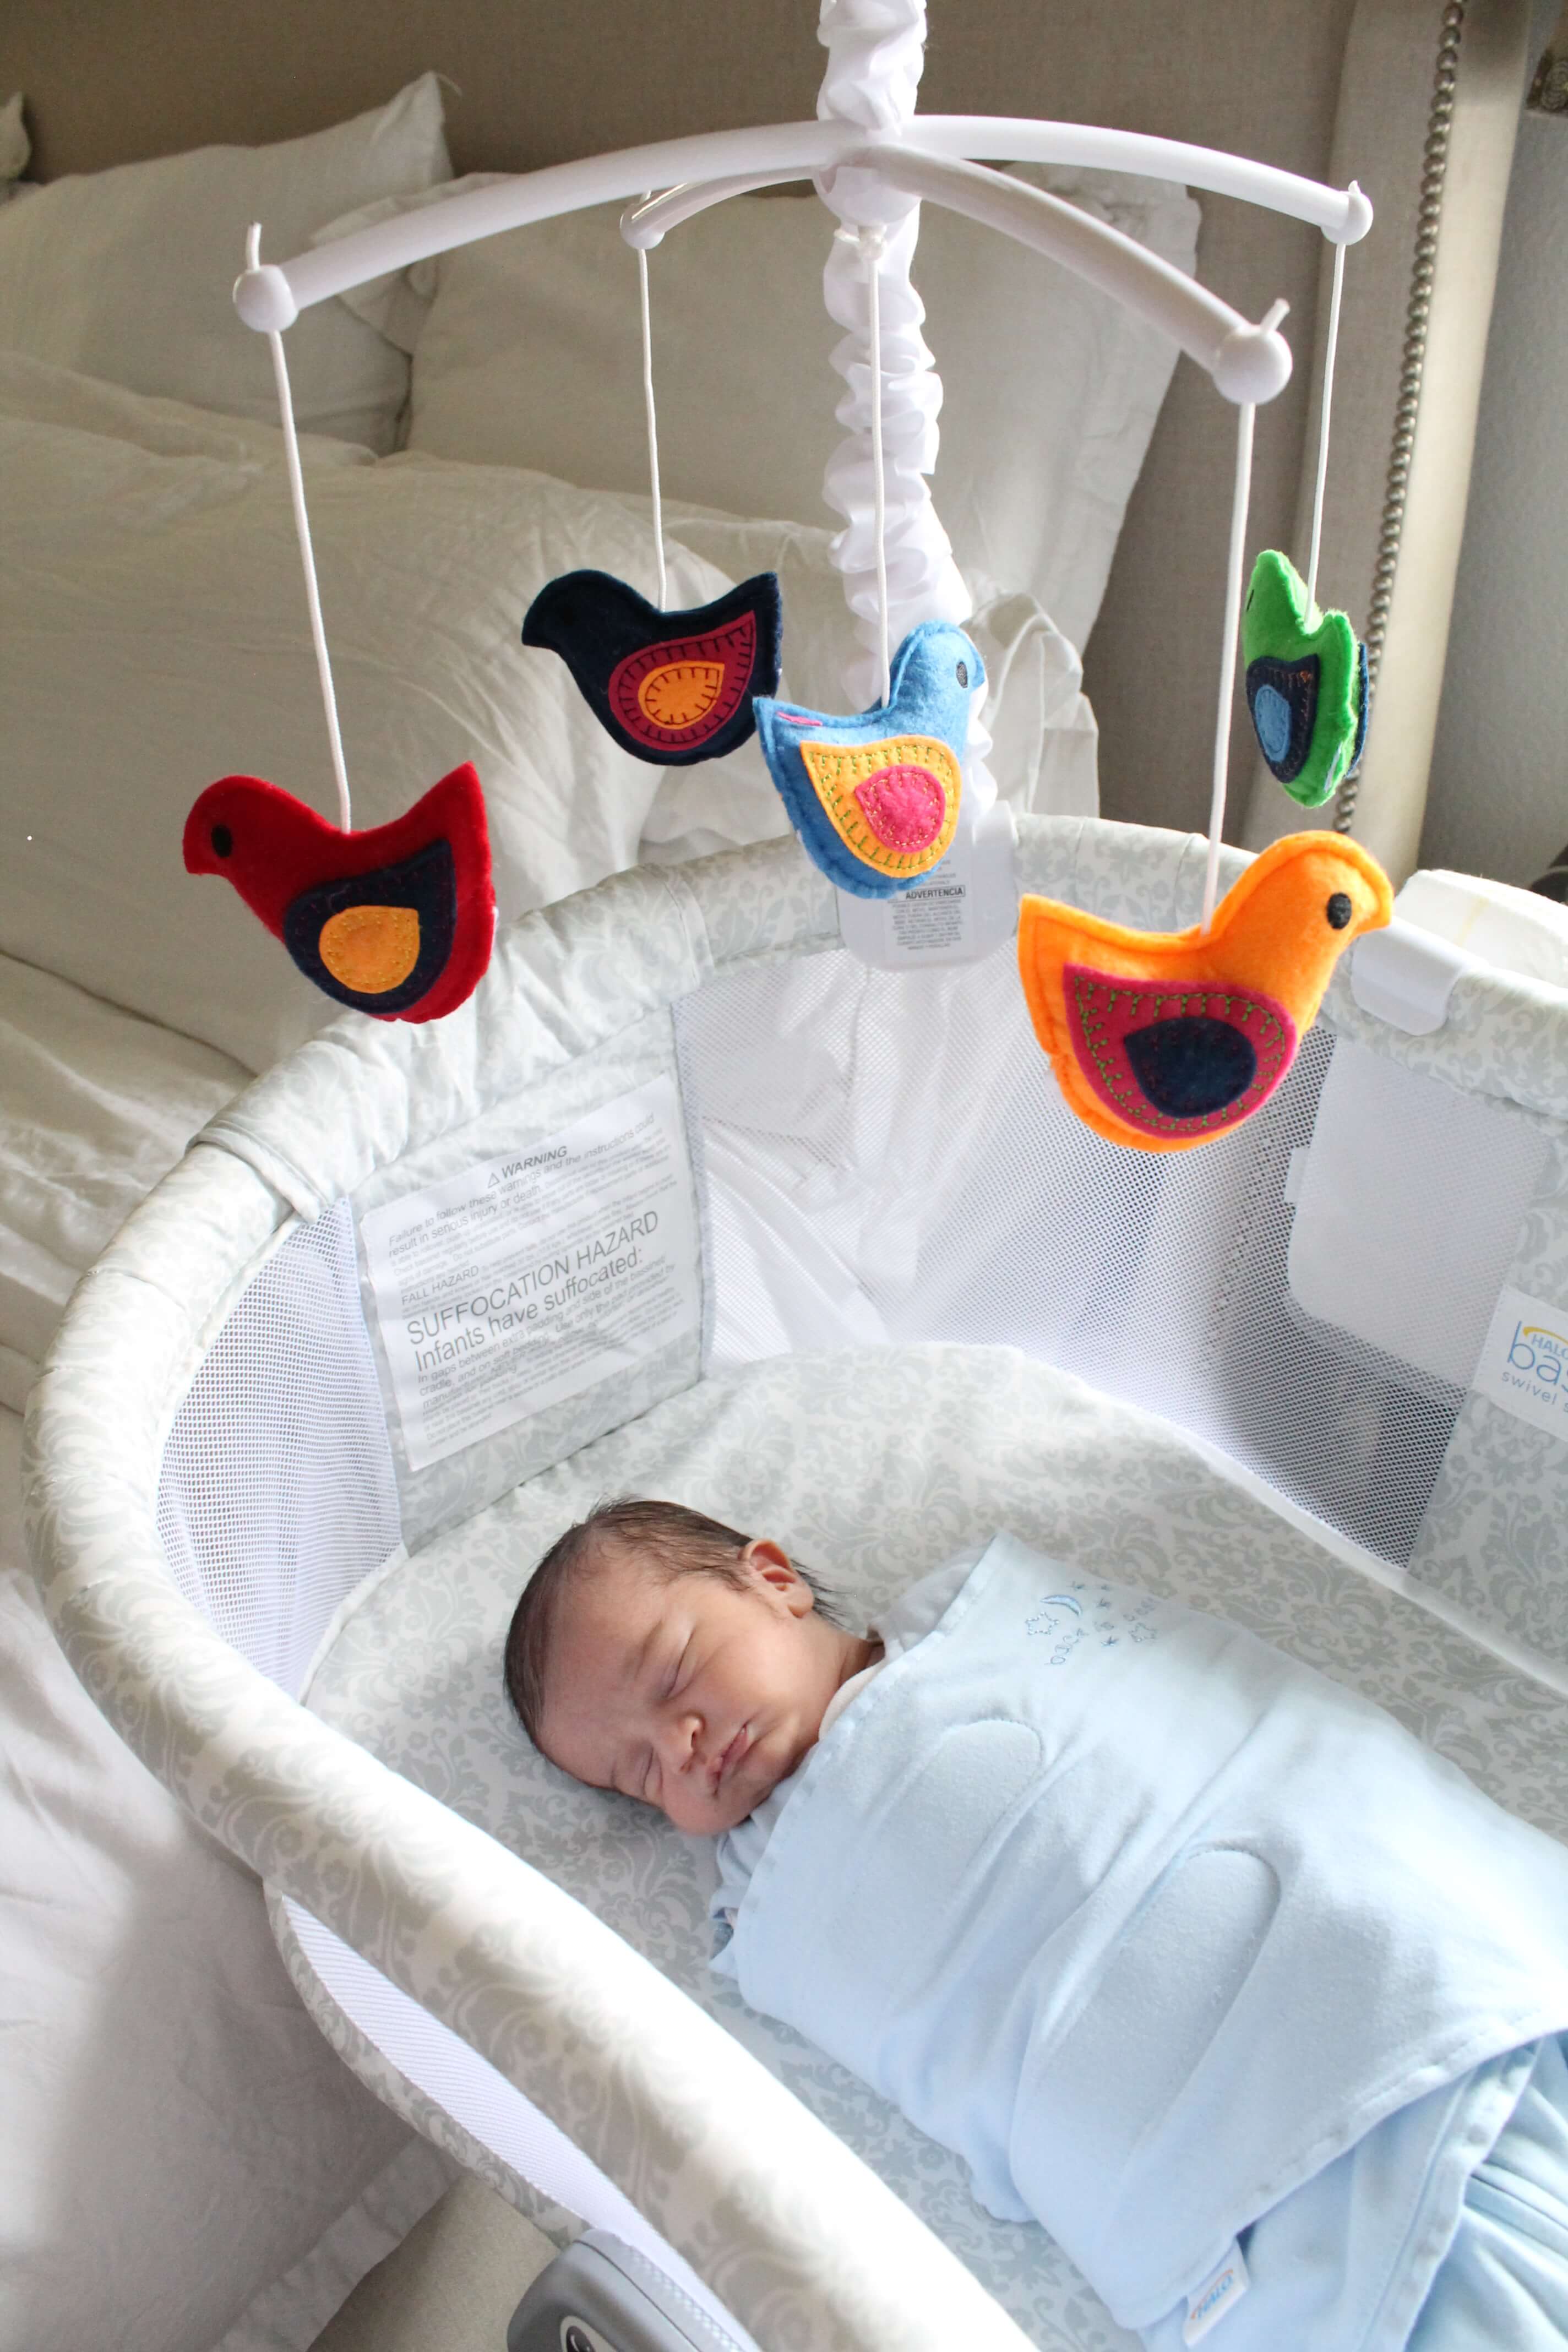 Safe Sleep Tips for Baby: From Bassinet to Crib